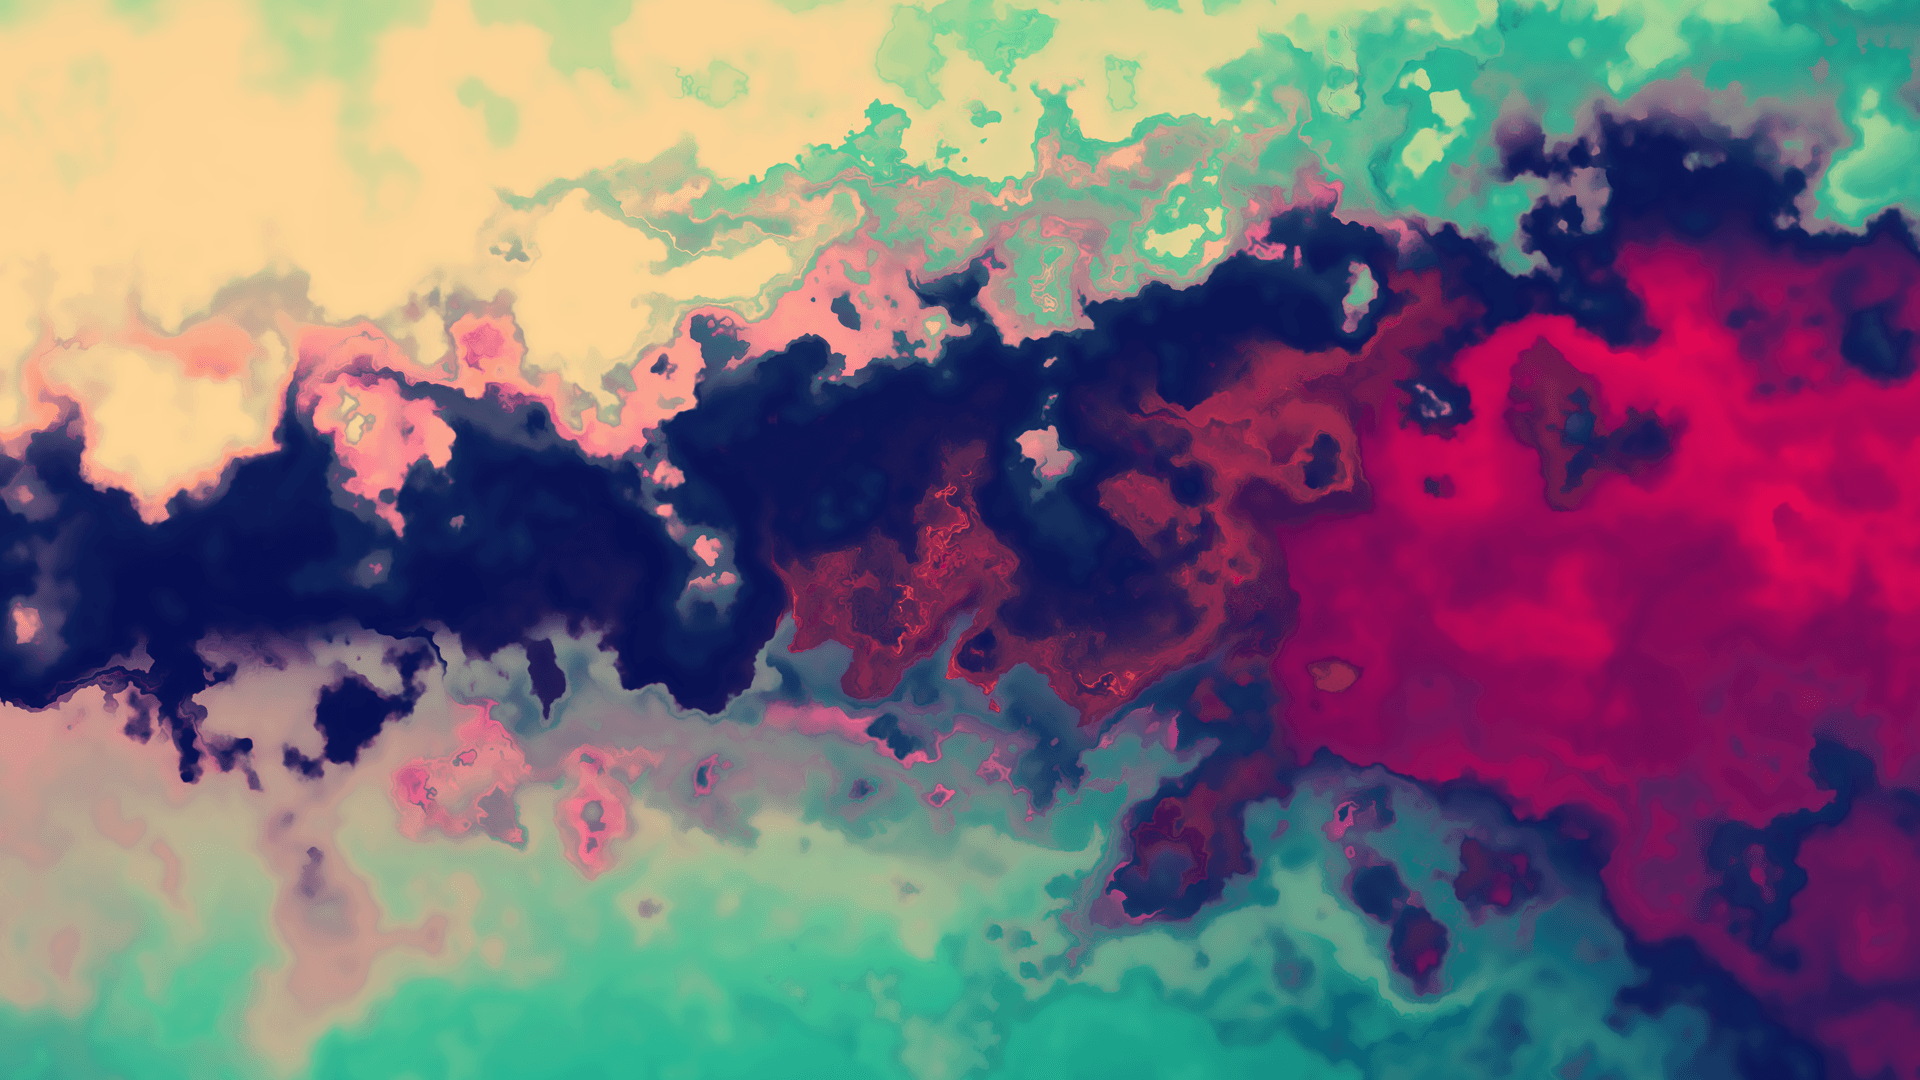 Psychedelic Wallpaper, 100% Quality Psychedelic HD Pics #OSY 4K